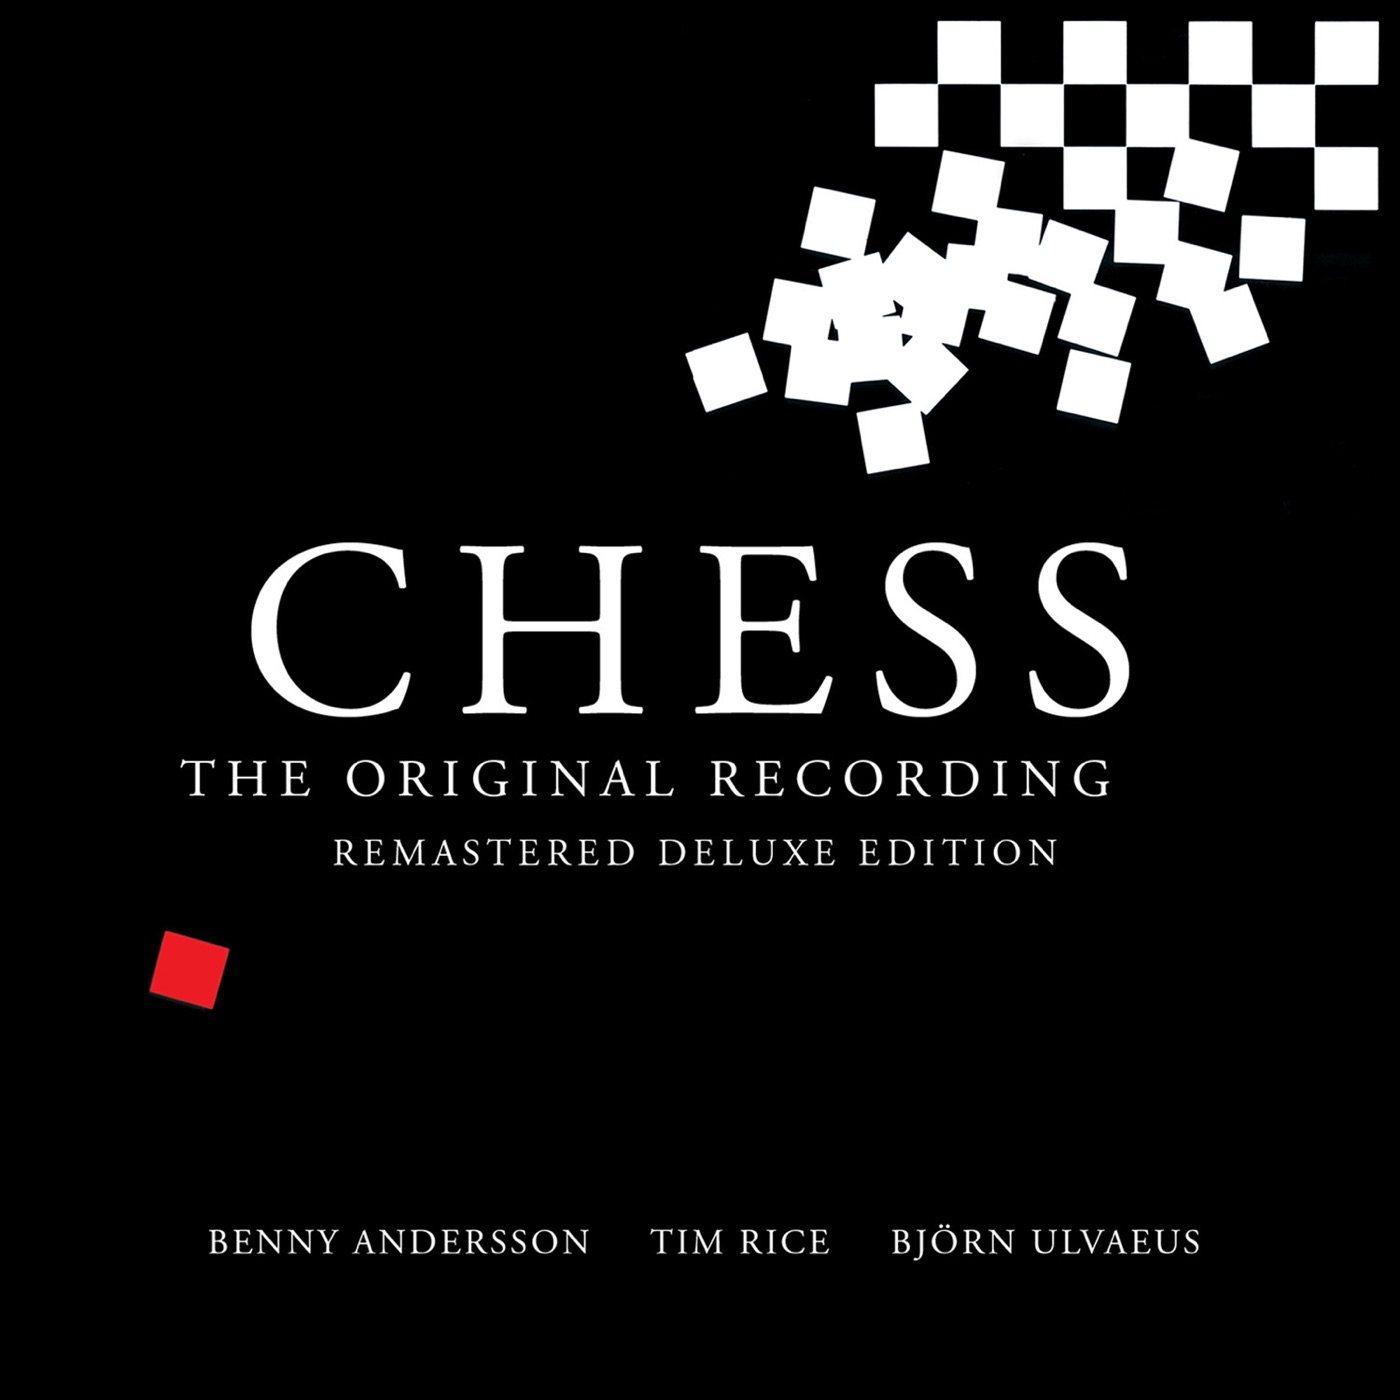 Chess by Benny Andersson, Tim Rice, Björn Ulveaus